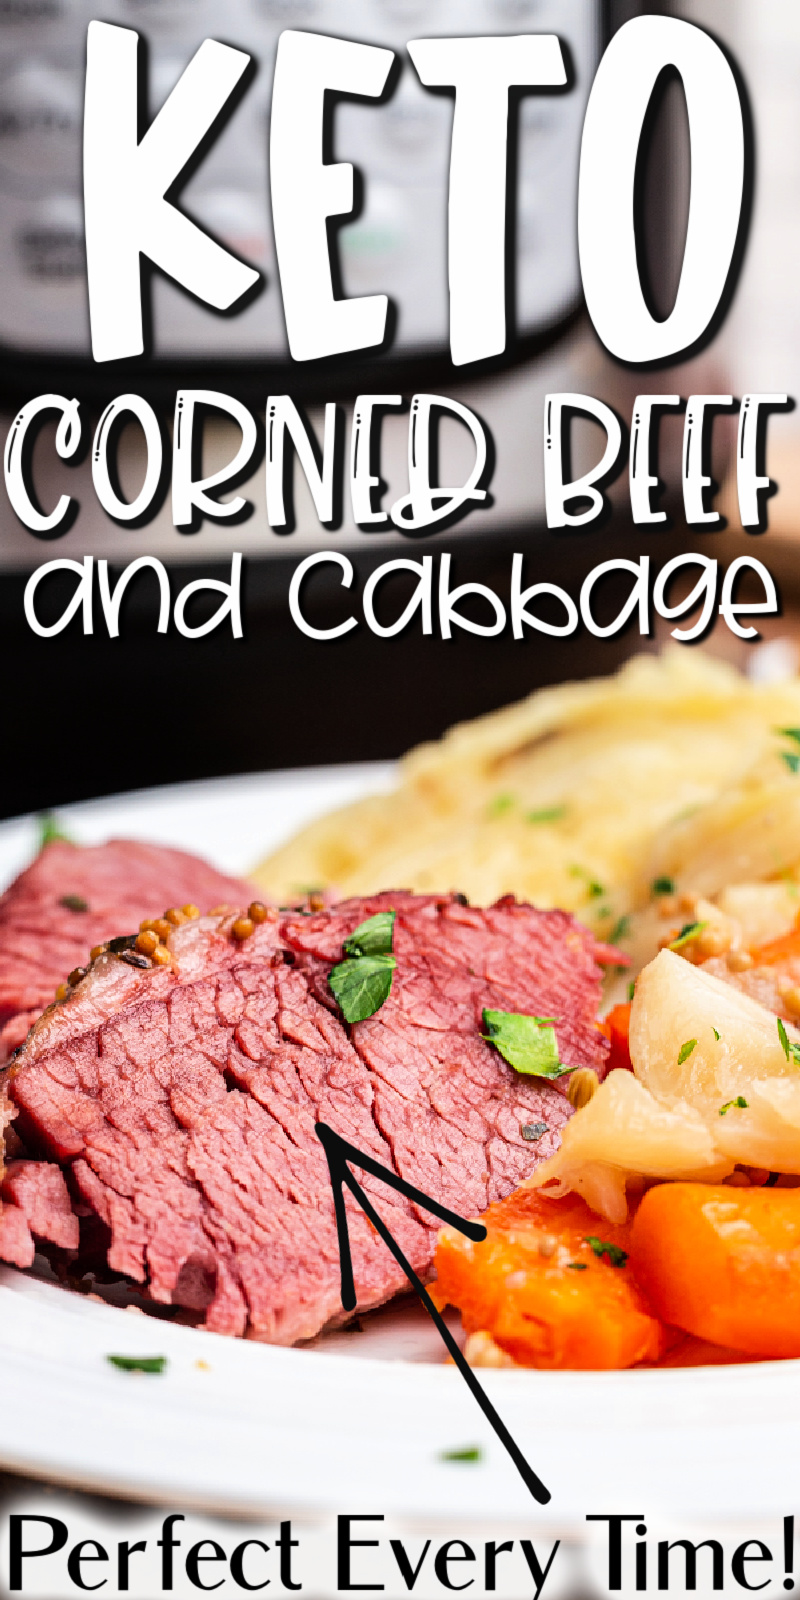 Keto Instant Pot Corned Beef and Cabbage - Whether you’re making corned beef for St. Patrick’s day or just a Sunday dinner for the family, this easy keto Instant Pot corned beef and cabbage recipe is sure to become a favorite. #lowcarb #keto #glutenfree #instantpot #beef #cornedbeef #cabbage #stpatricksday #easy #recipe #beef #roast